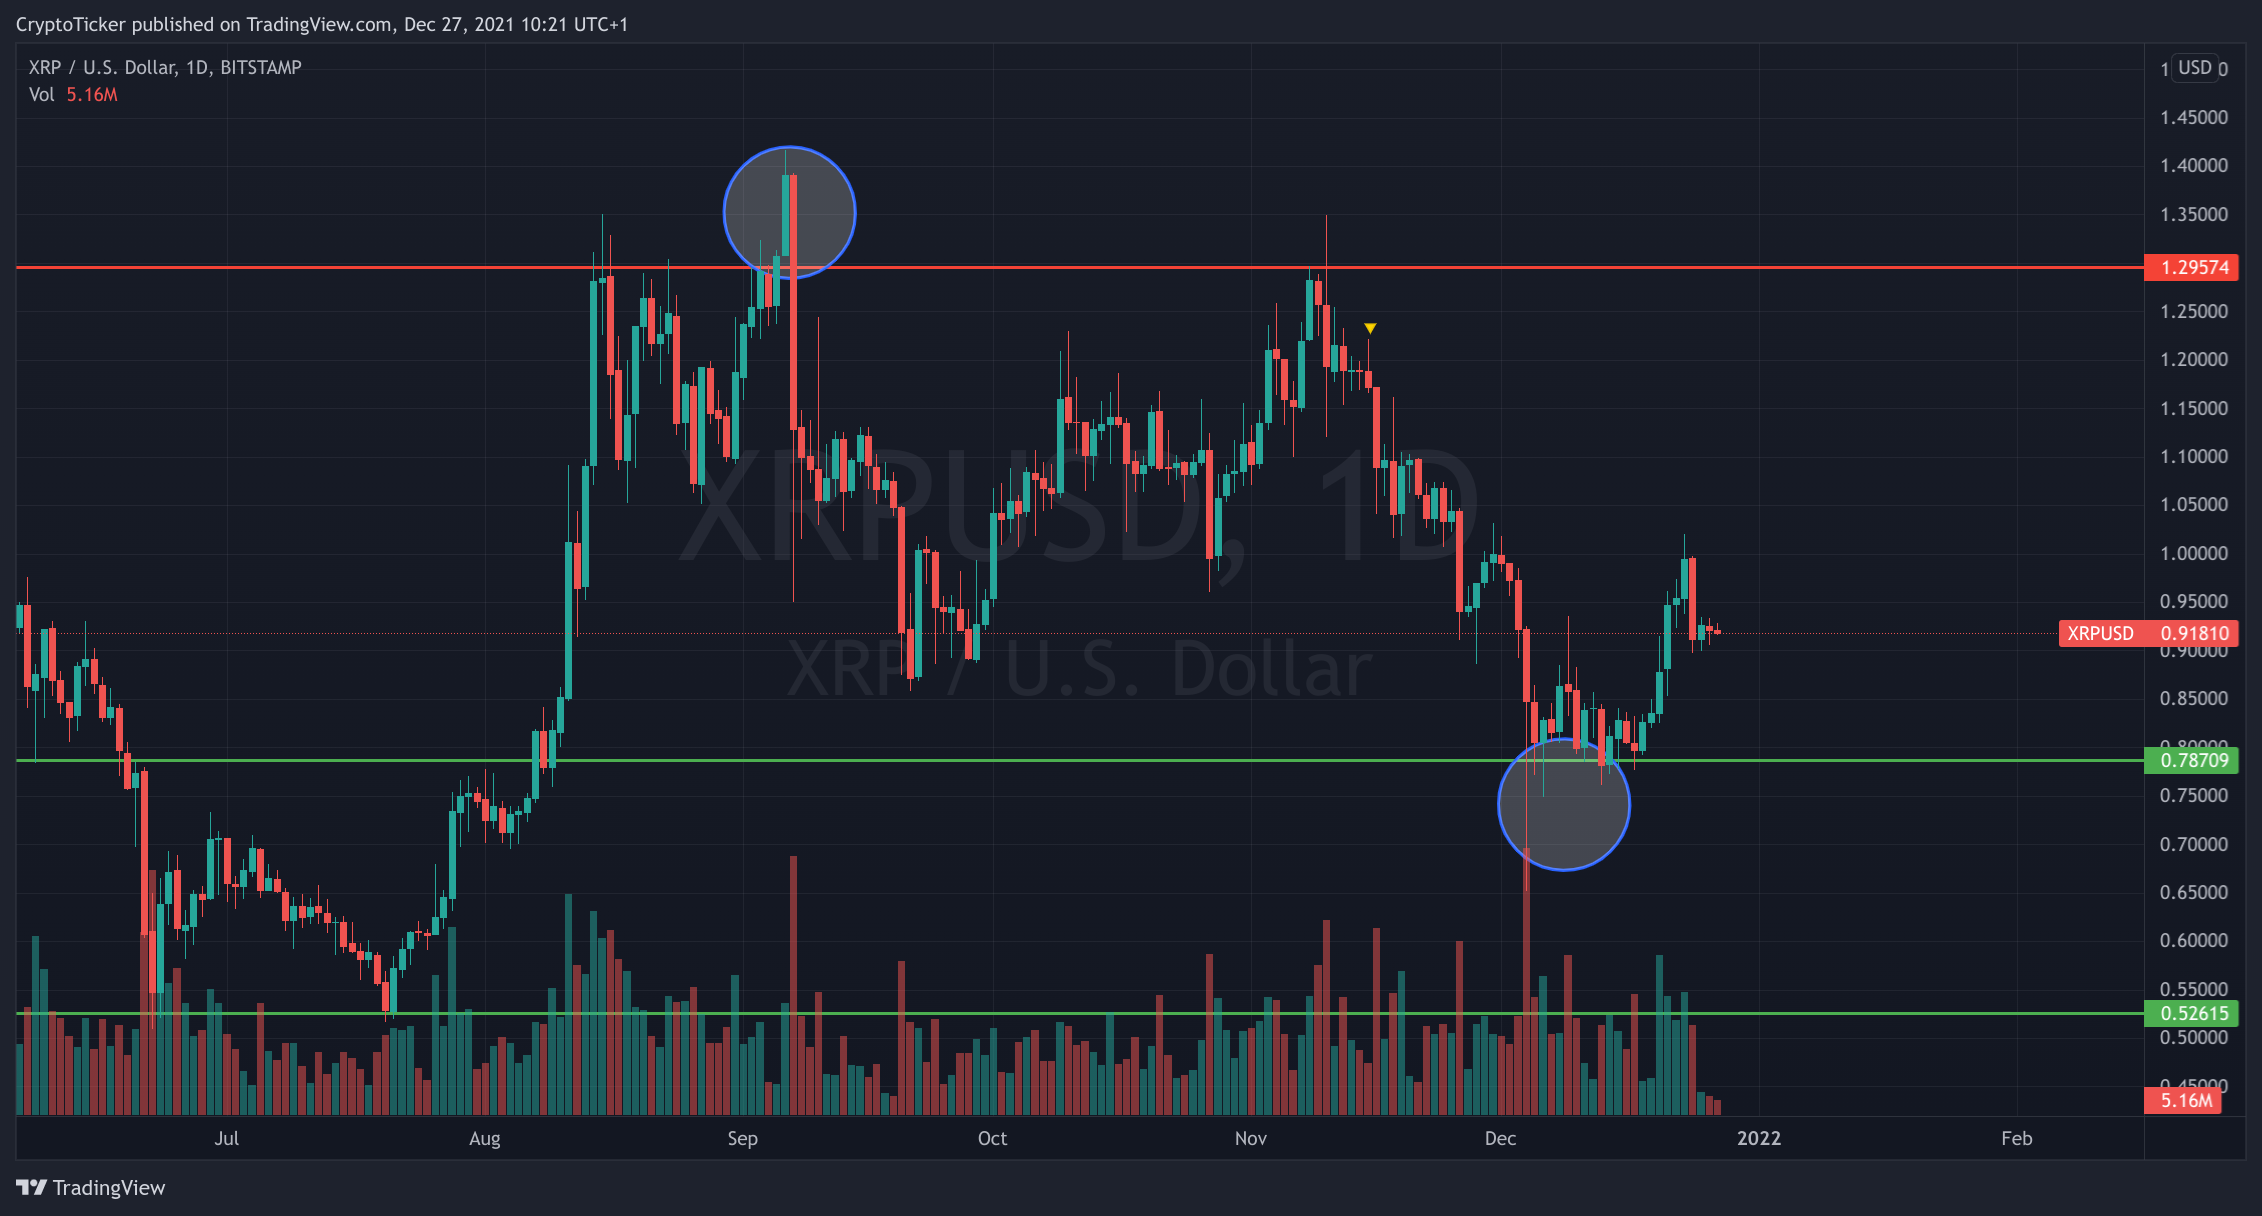 XRP/USD 1-day chart showing XRP sideways trend